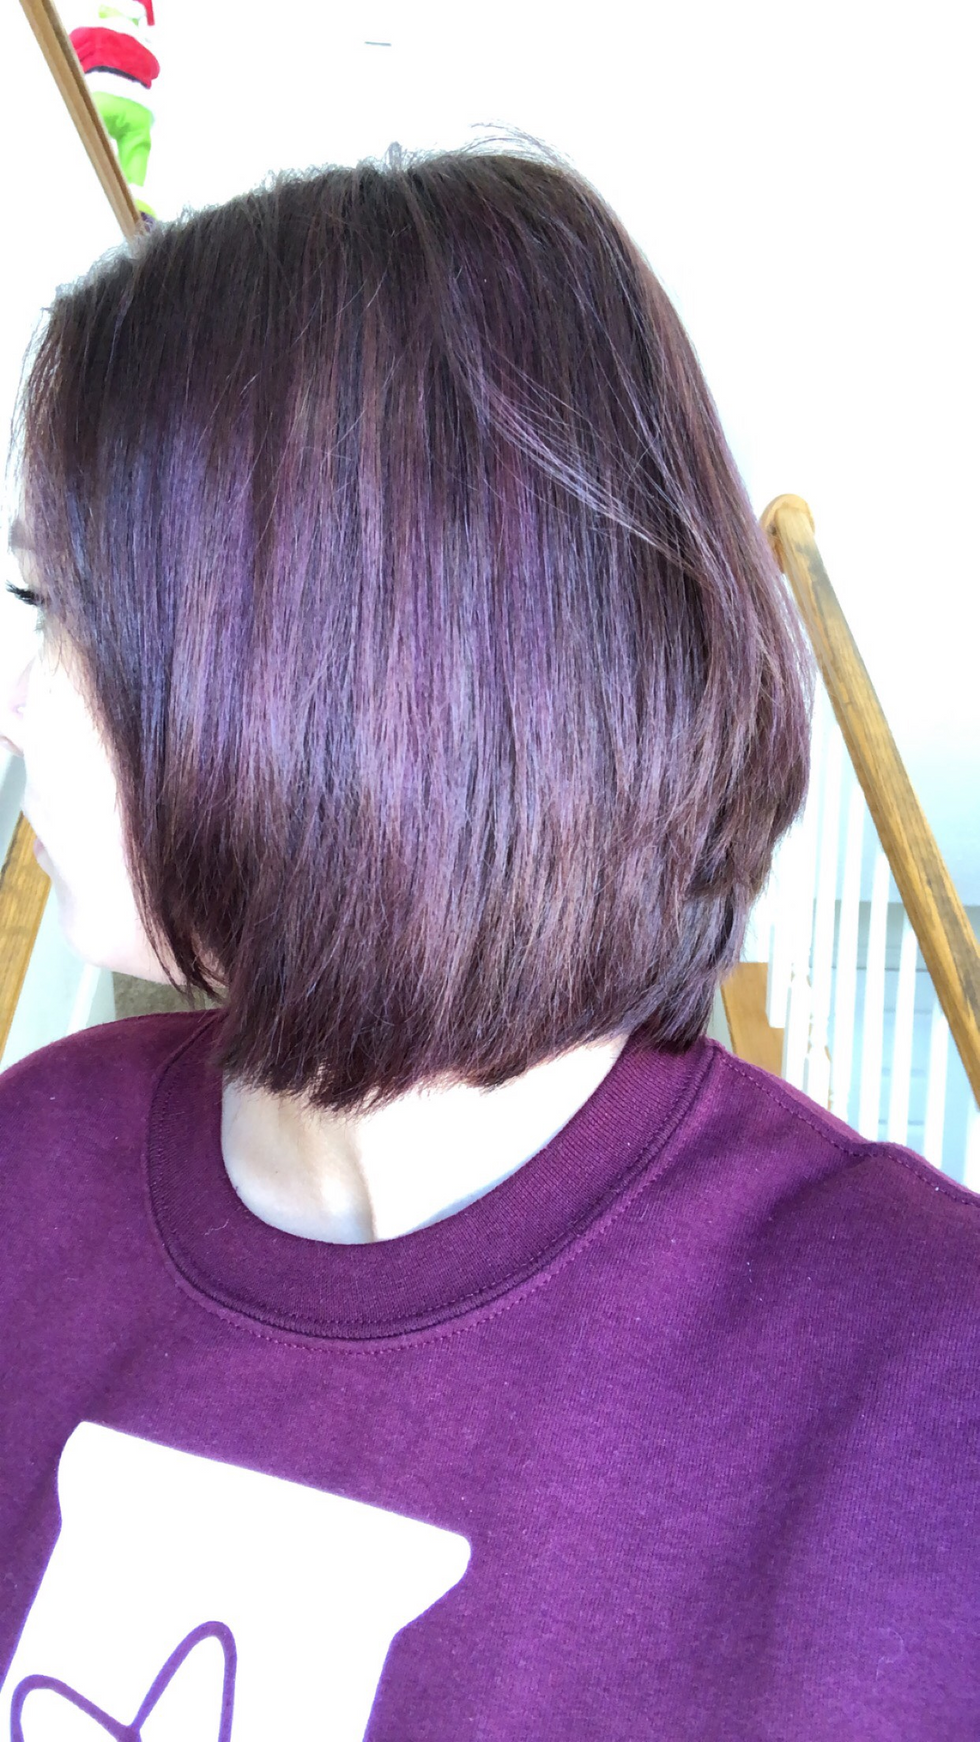 I Made A Wild Decision And Dyed My Hair Purple